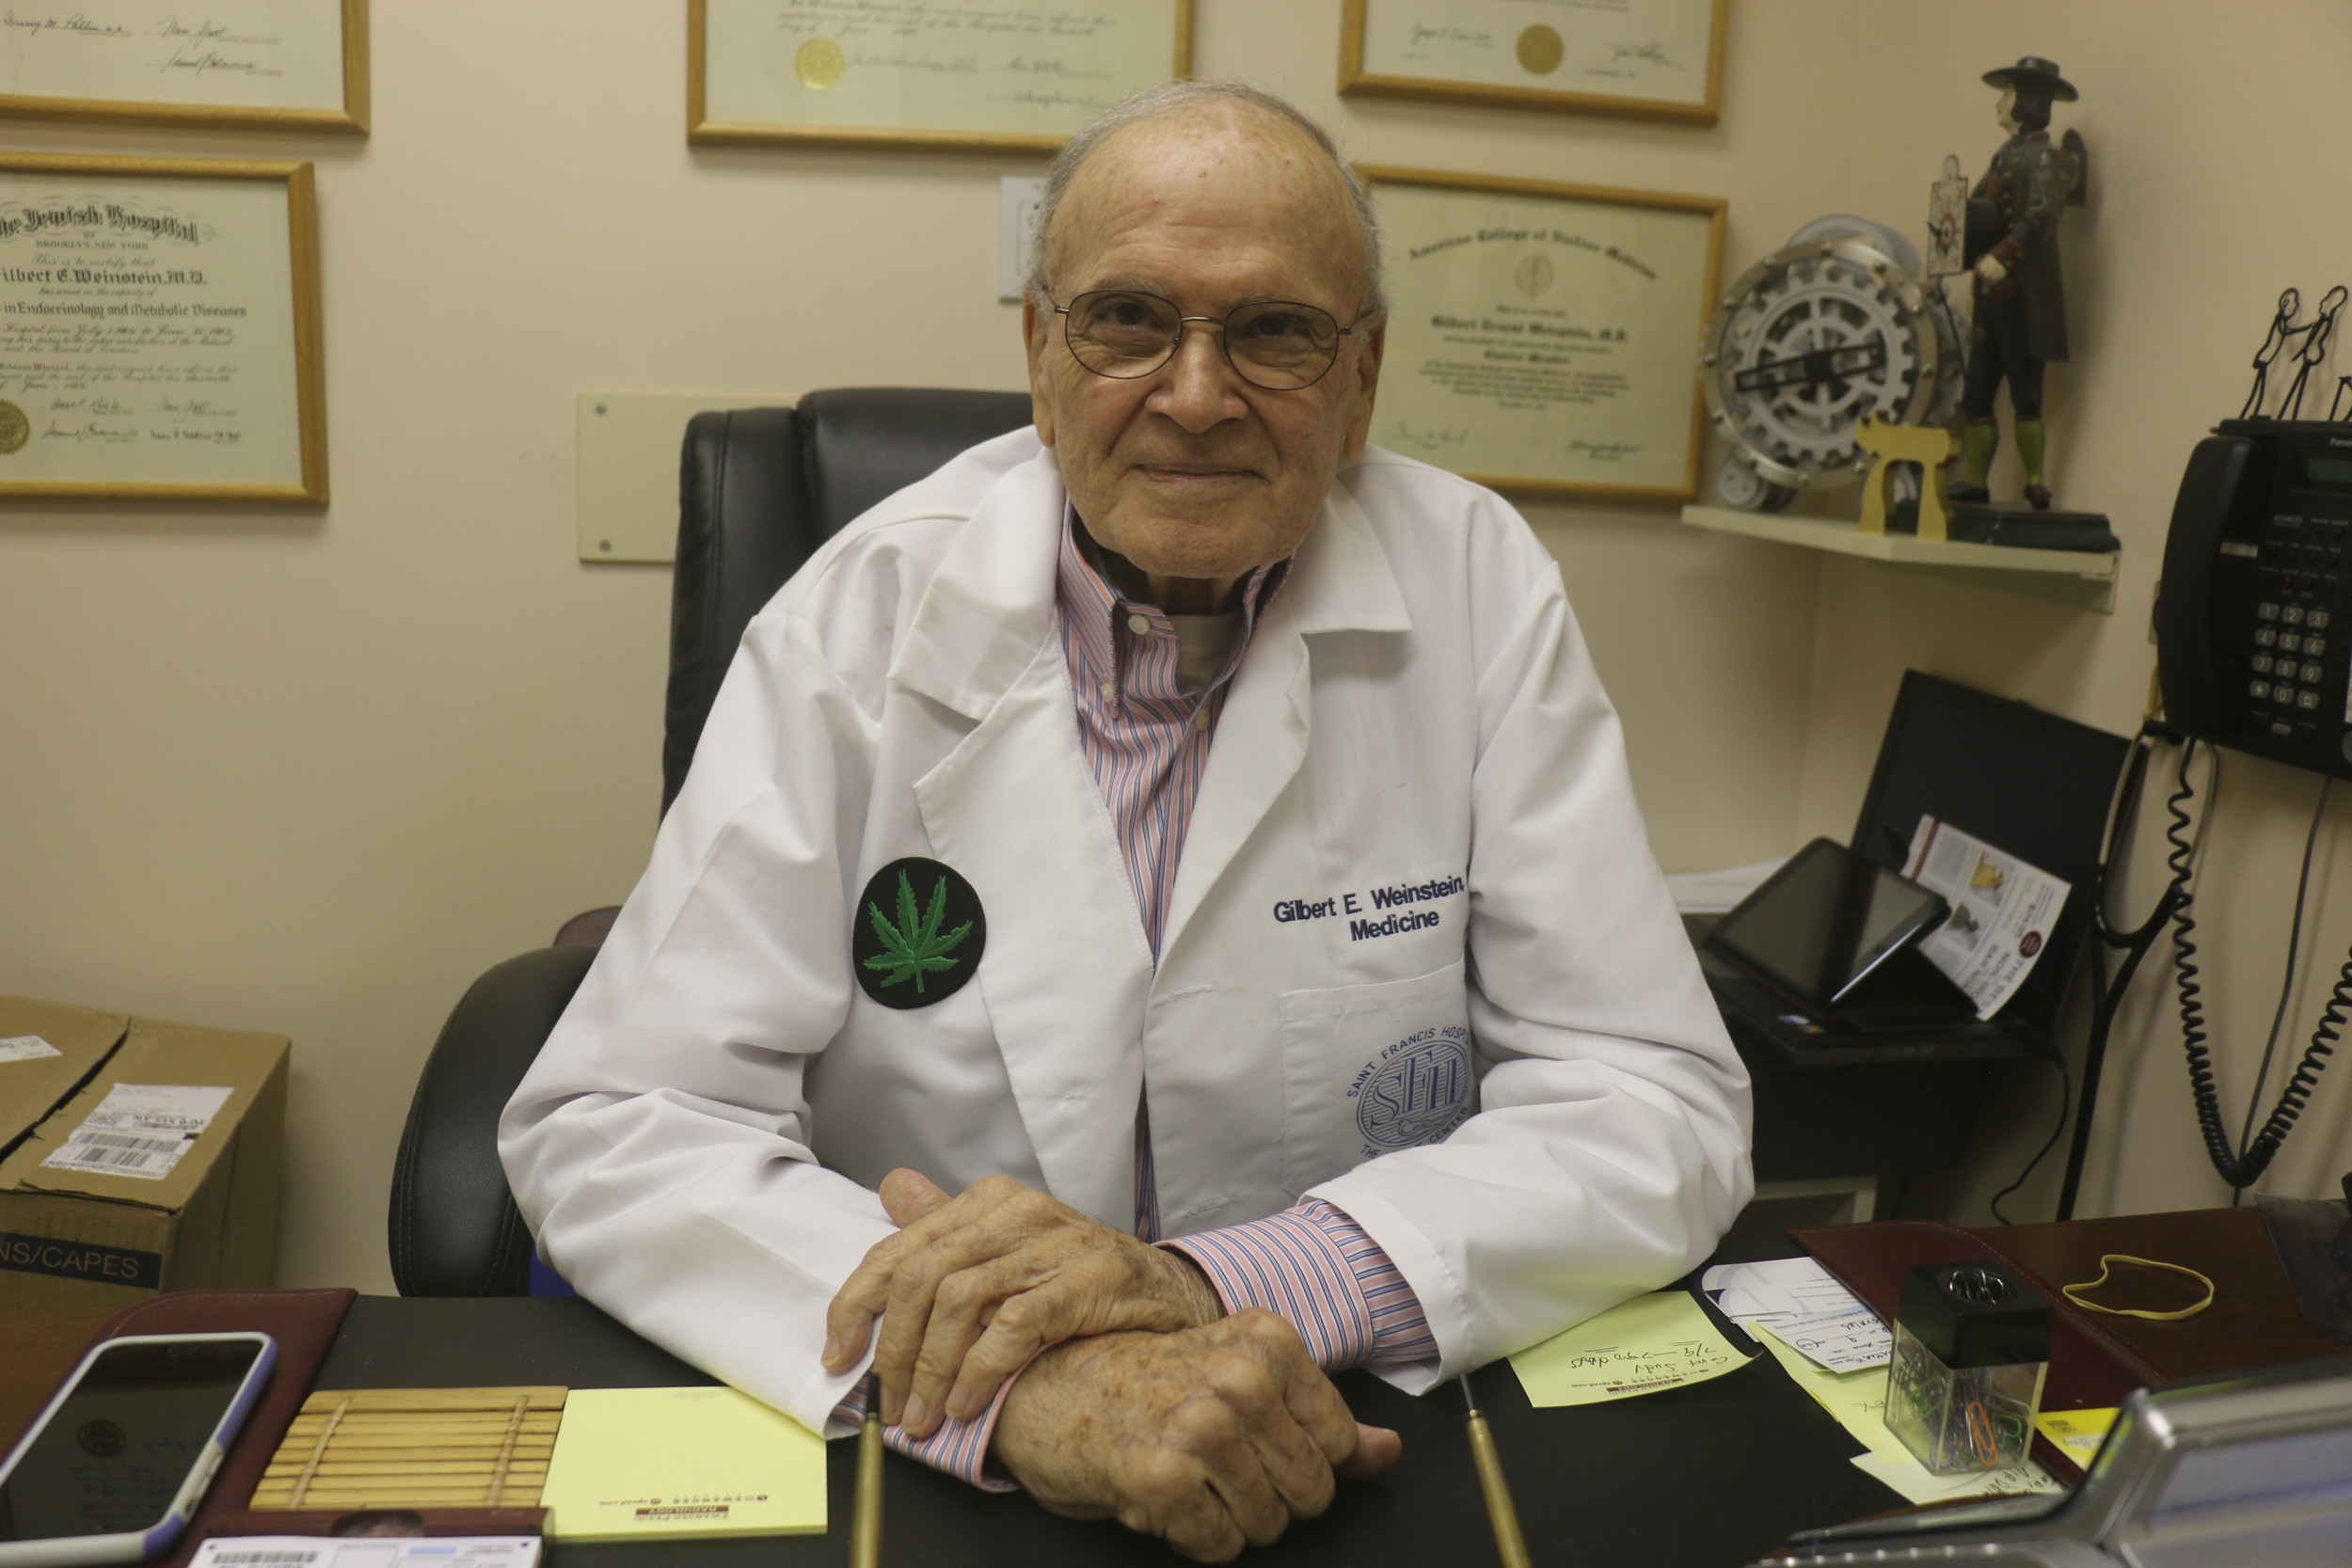 Dr. Gilbert Weinstein ended his longtime practice to shift to medical marijuana treatment.